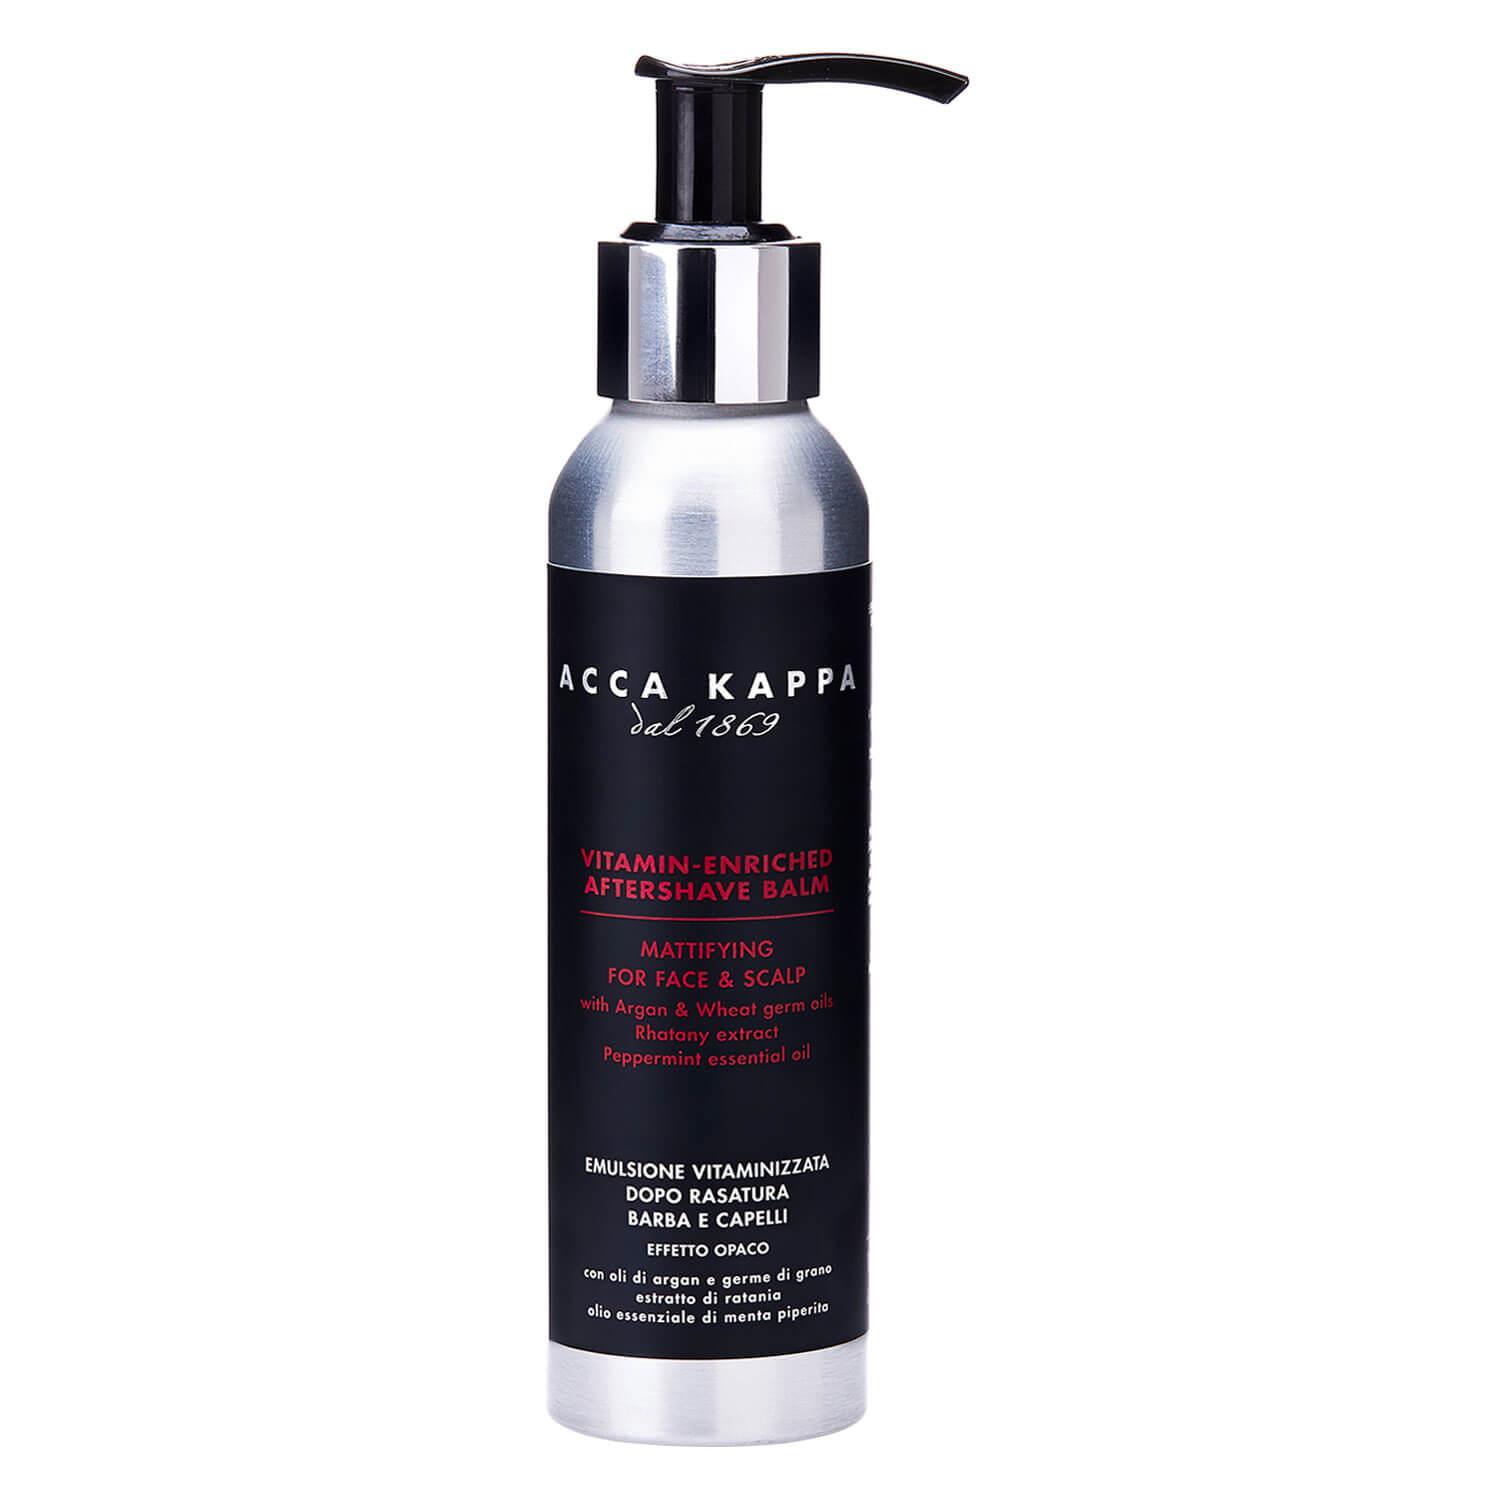 ACCA KAPPA - Vitamin-Enriched Aftershave Balm